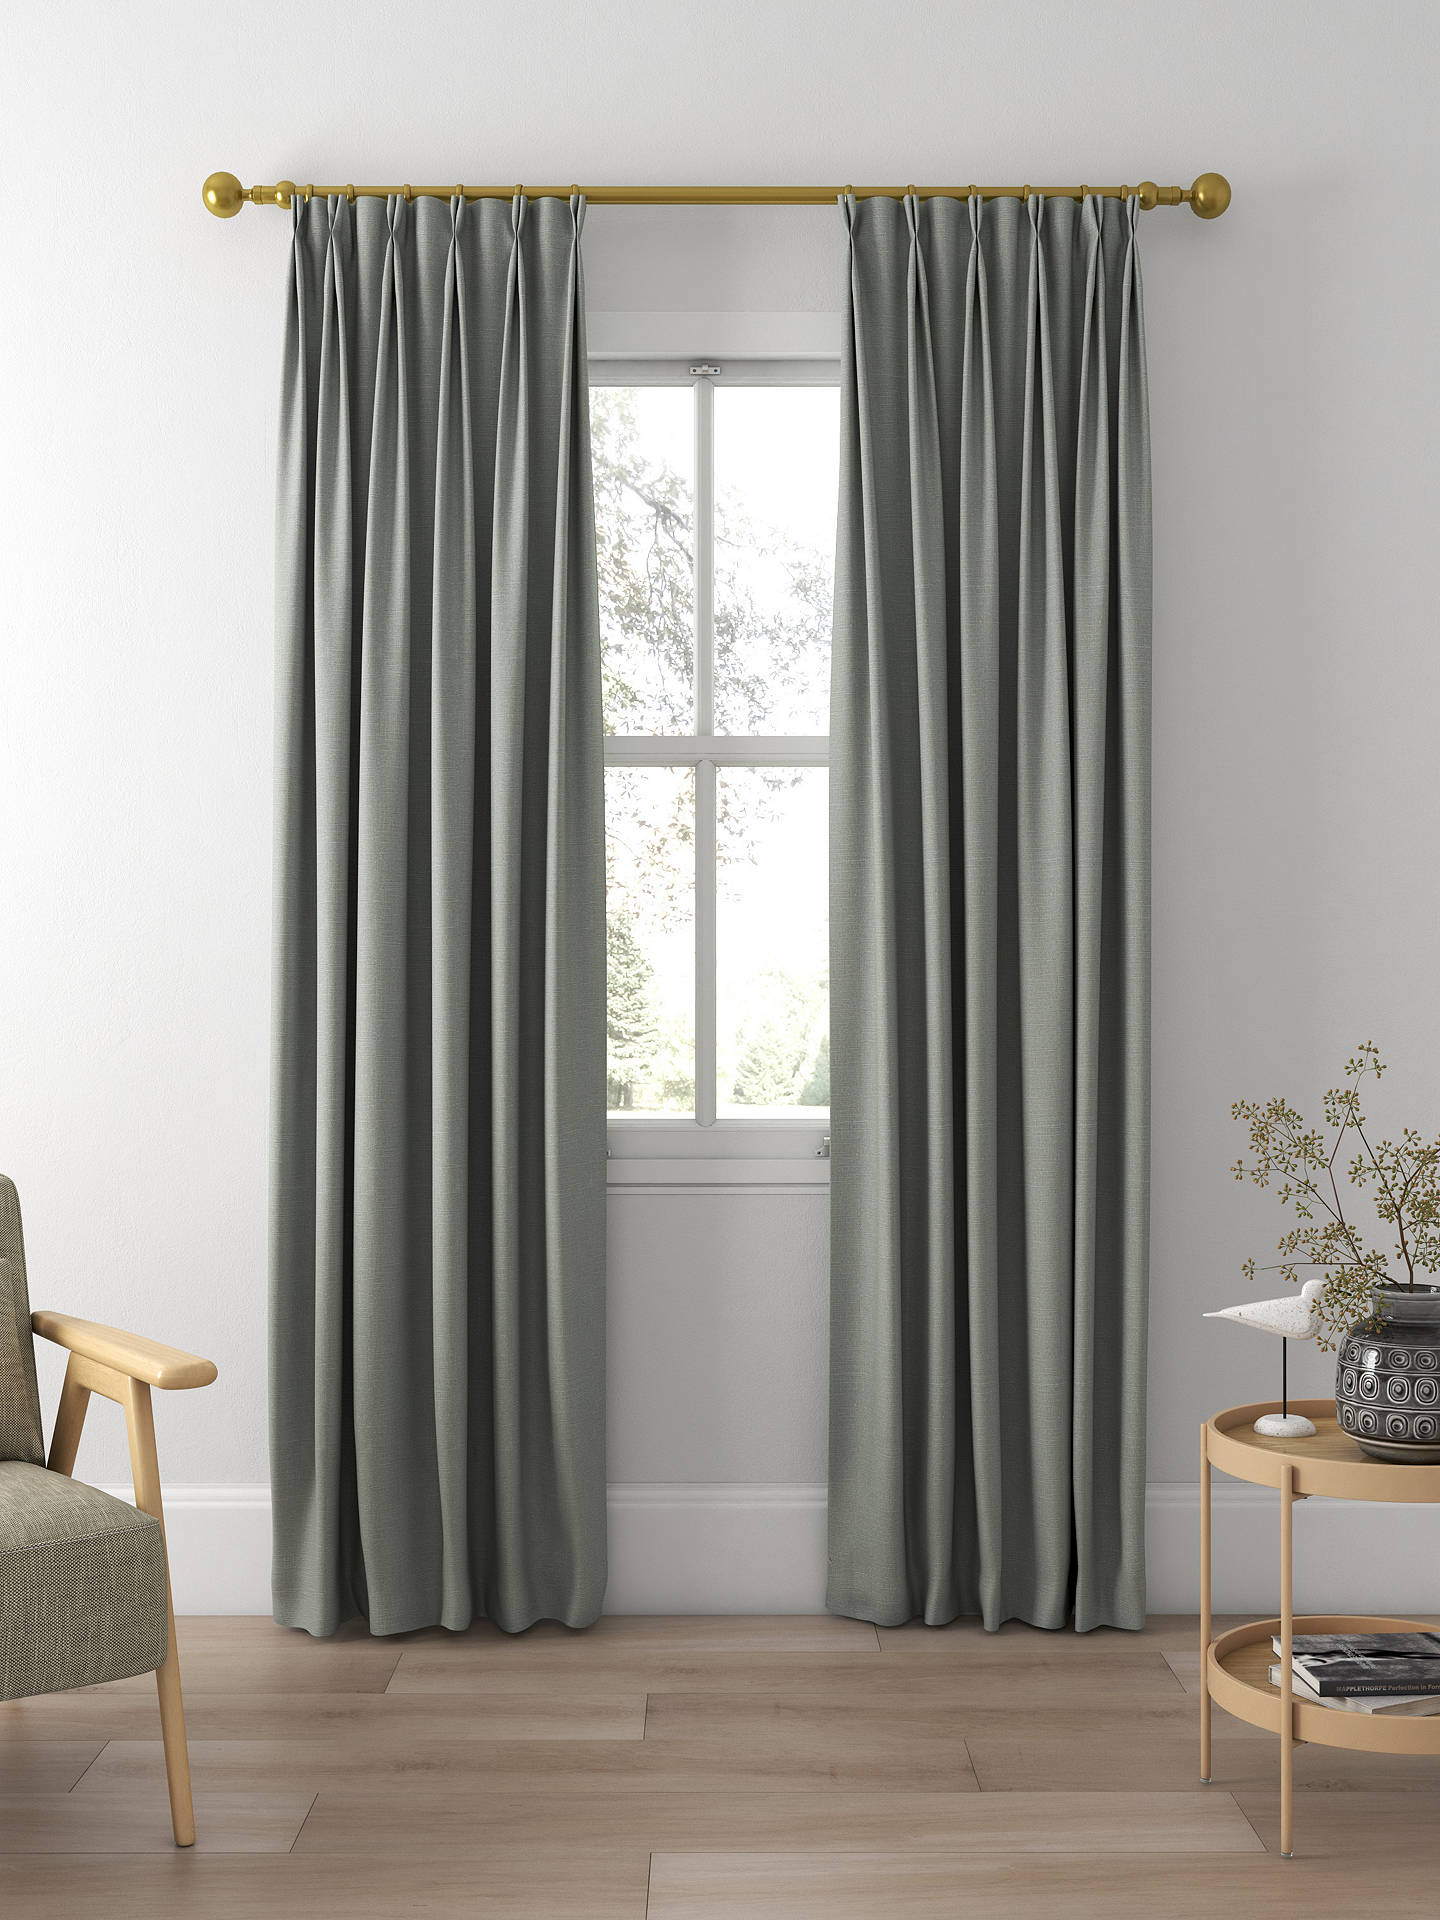 Sanderson Tuscany II Made to Measure Curtains, Wren Feather